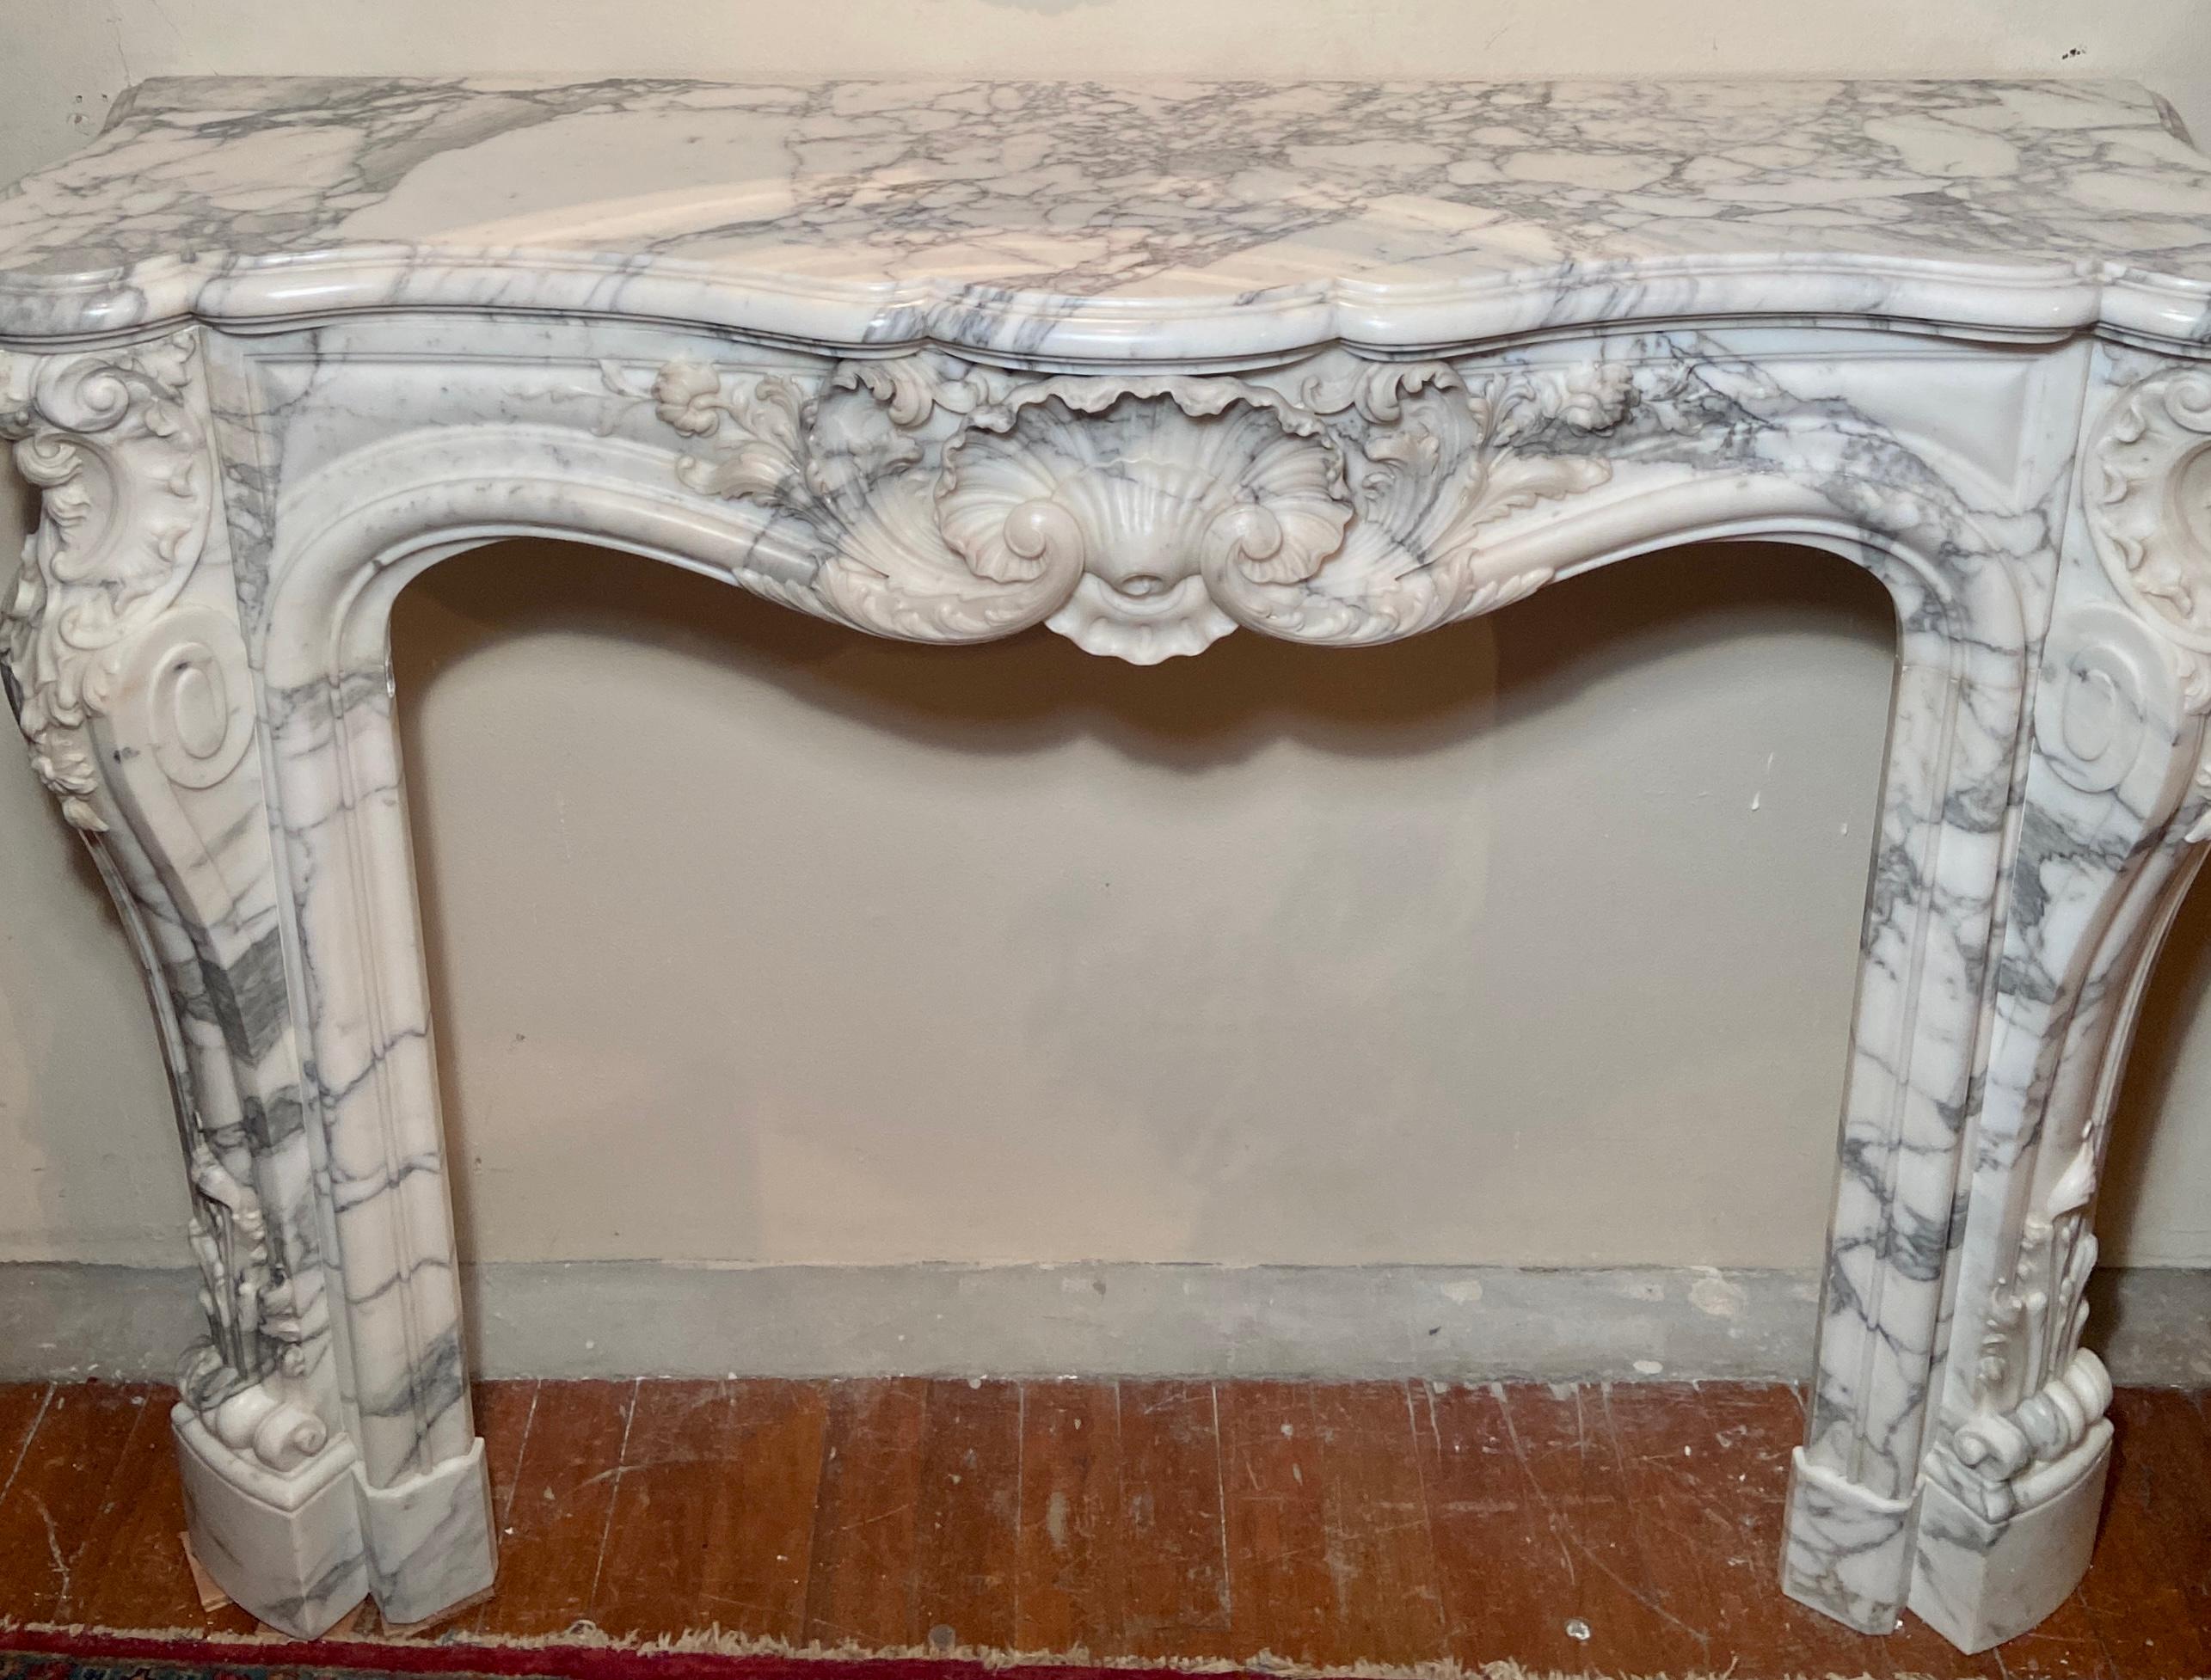 Magnificent antique 18th century French richly sculpted marble mantelpiece.